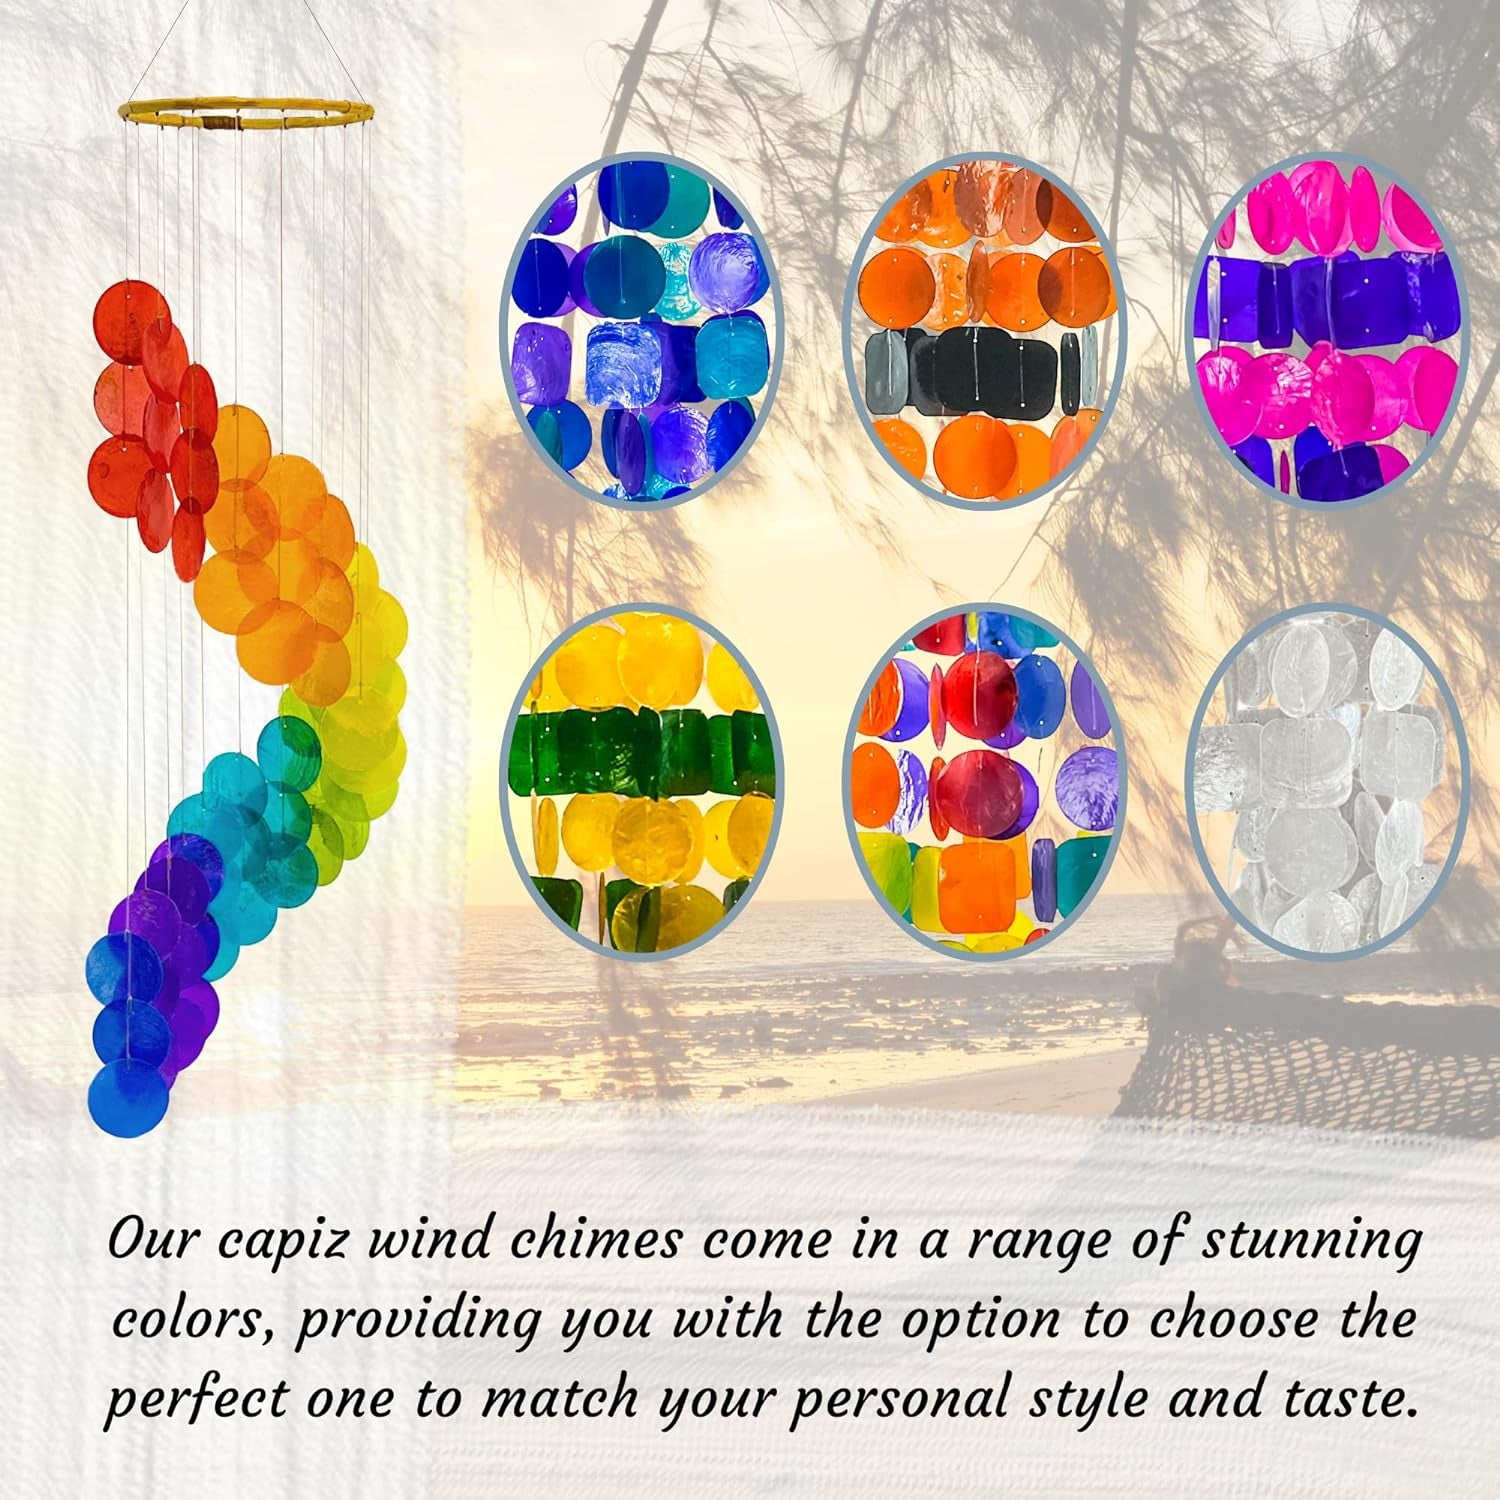 23325 Wind Chimes for outside Birthday Gifts for Mother Daughter Sister Aunt Women Farmhouse Beach Home Decor Windchimes Outdoors Garden Patio Yard Sea Glass Capiz Shells 27 Inch